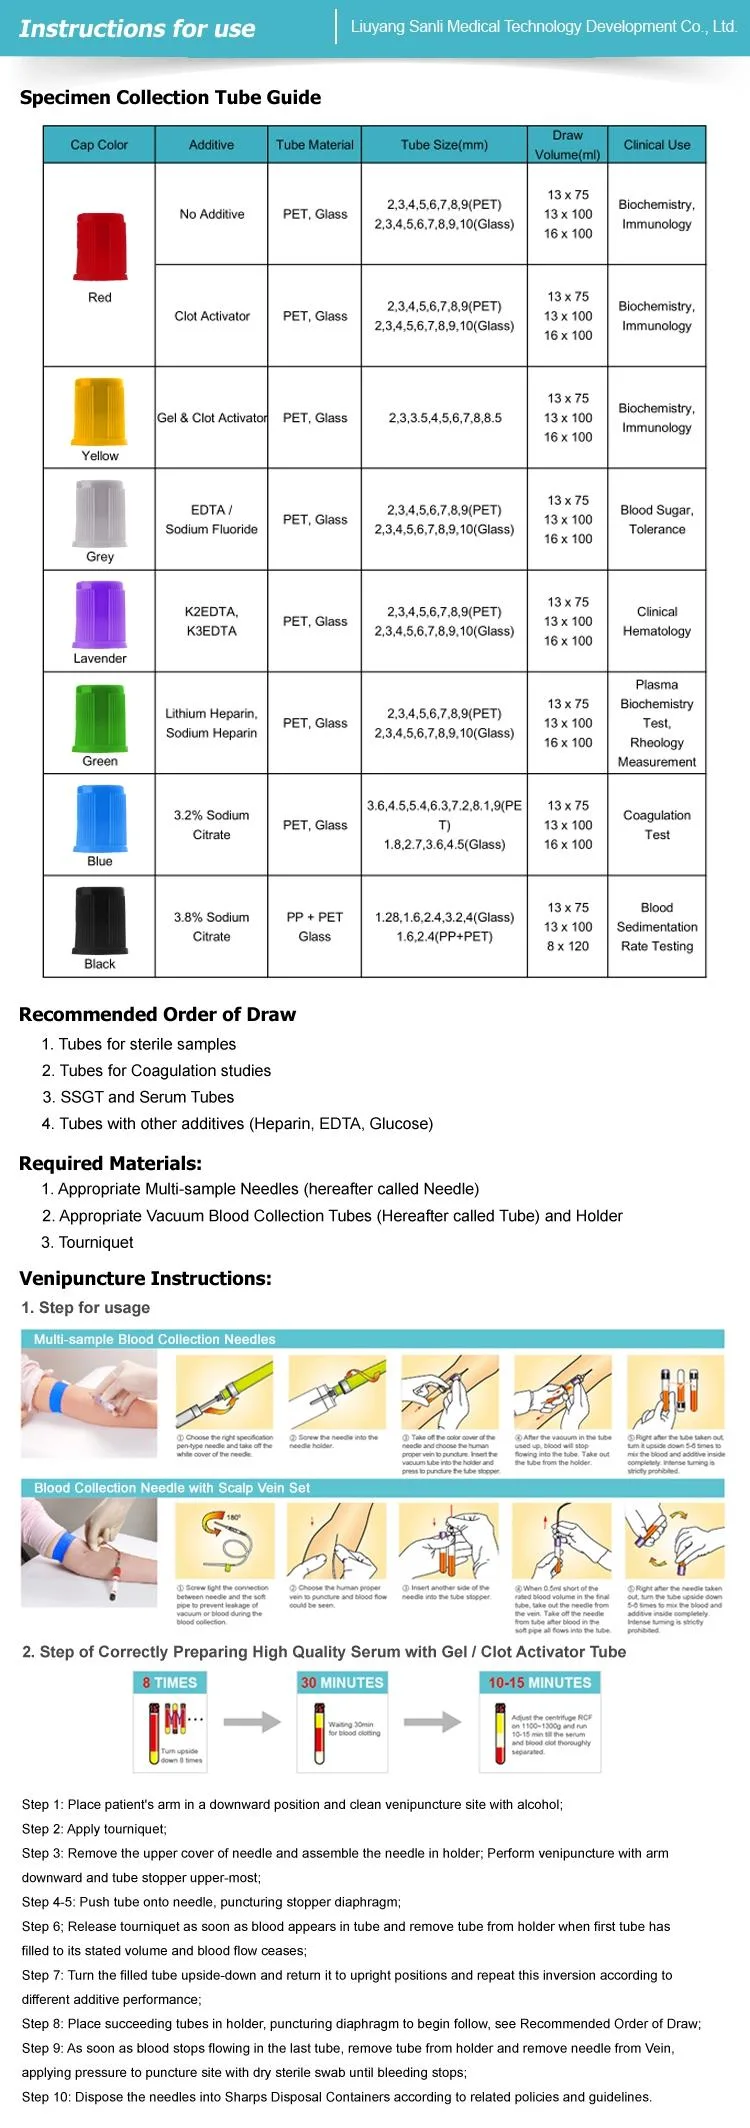 Green Top Lithium Heparin Non-Vacuum Test Tube for Blood Collection